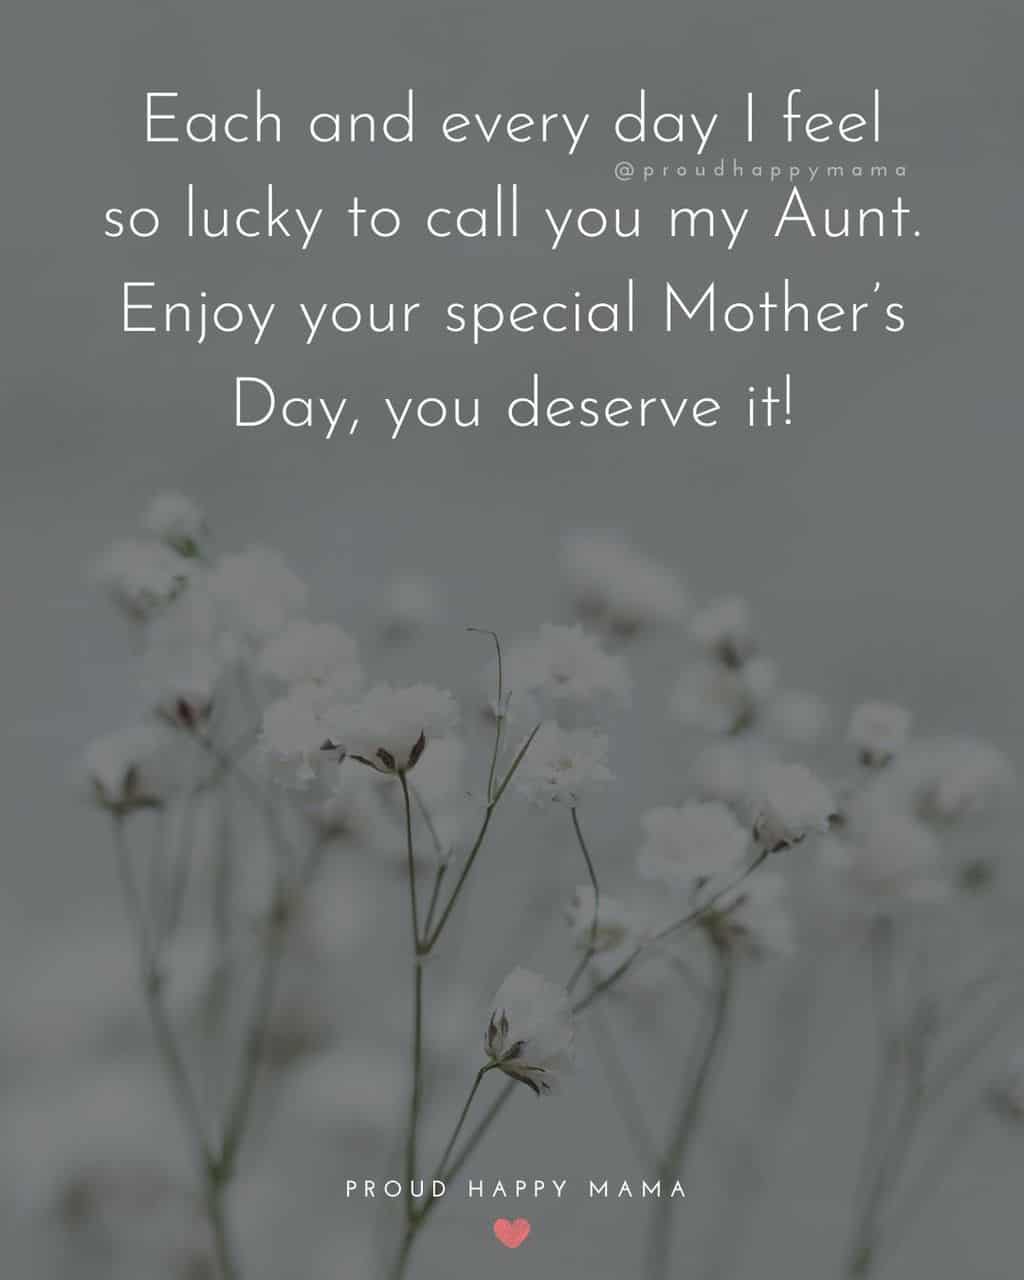 Happy Mothers Day Aunt - Each and every day I feel so lucky to call you my Aunt. Enjoy your special Mother’s Day, you deserve it!